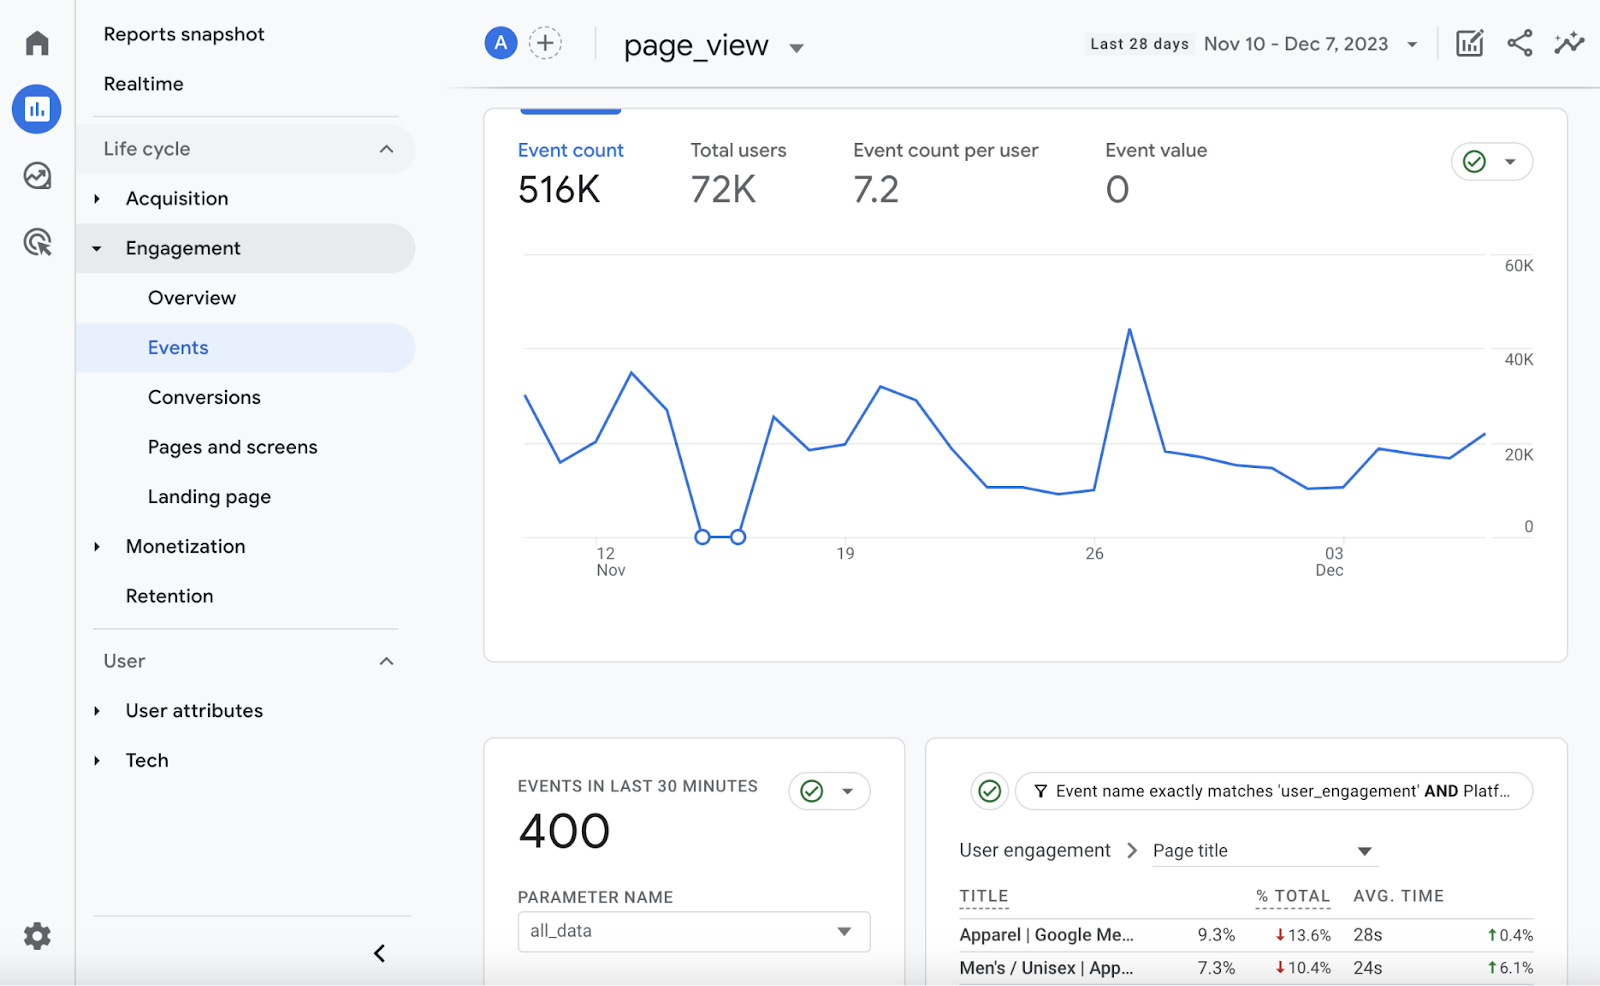 "page_view" event dashboard